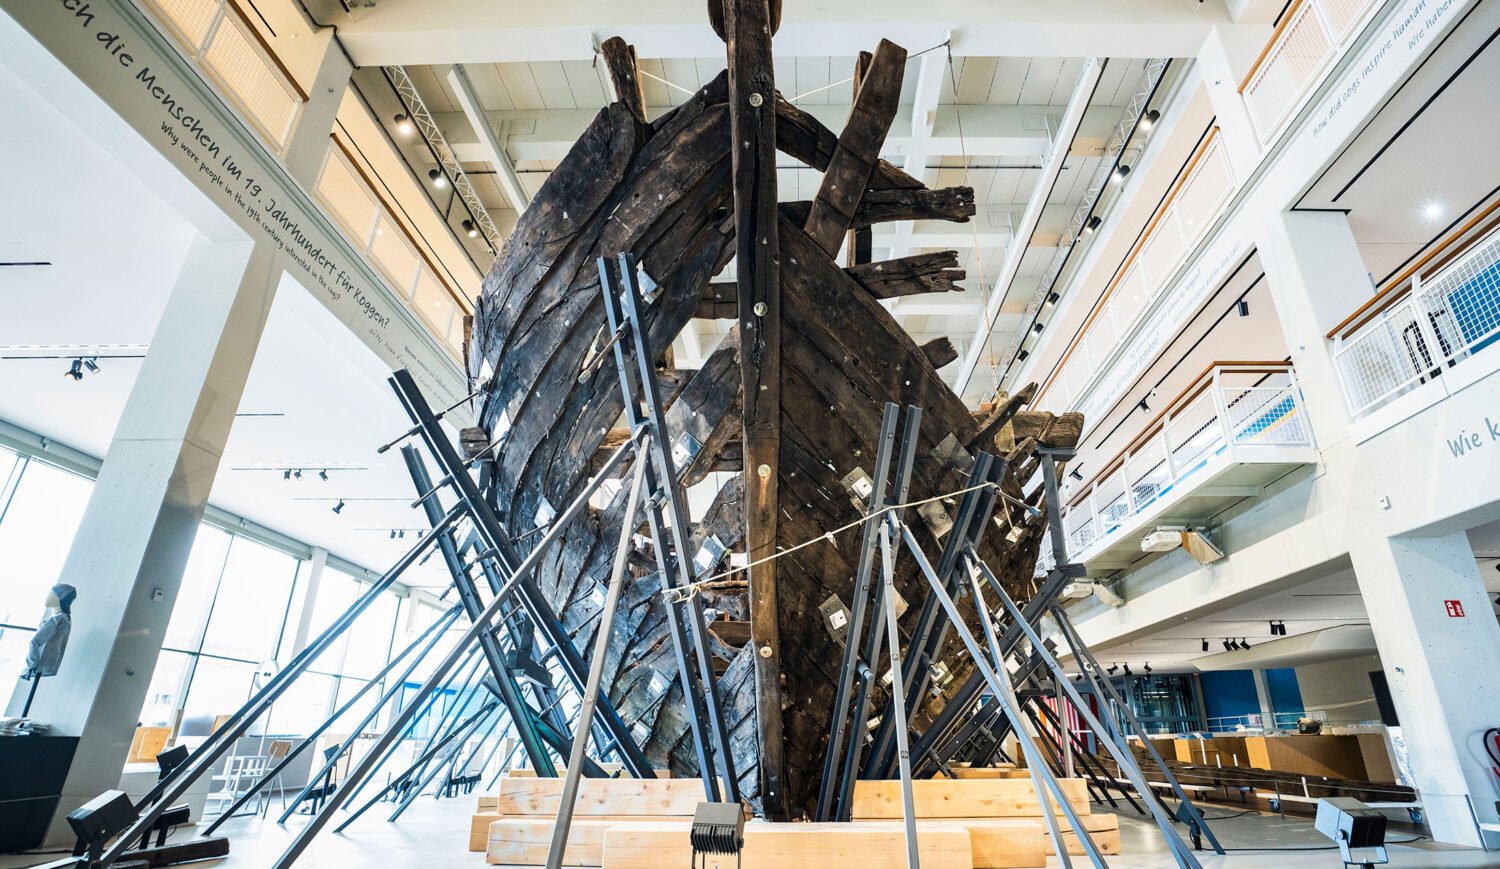 The remains of a cog from the 14th century are among the most important exhibits of the German Maritime Museum